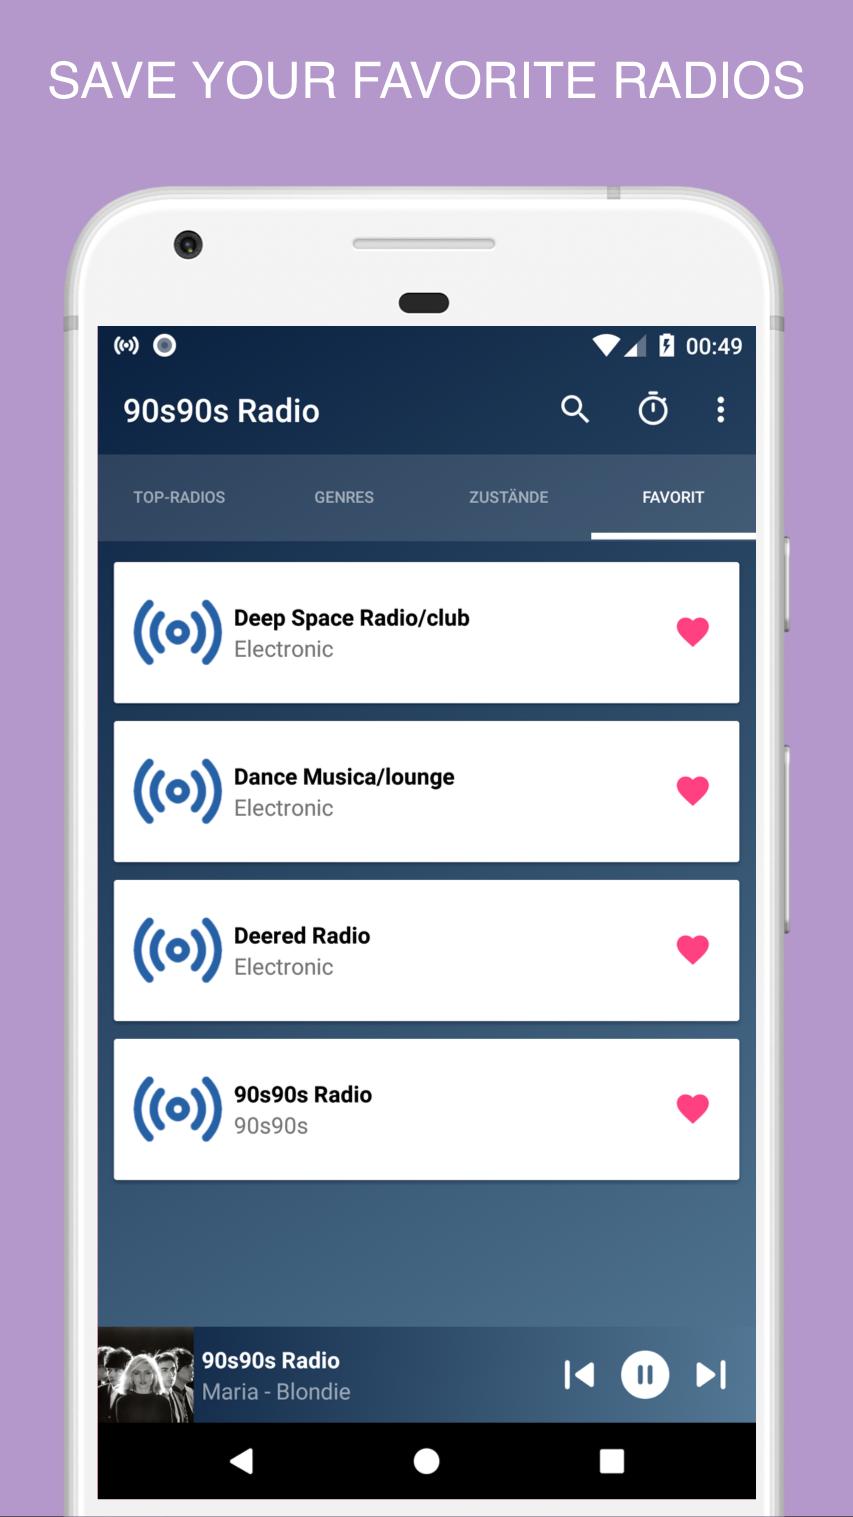 90s90s Radio App Free Live for Android - APK Download